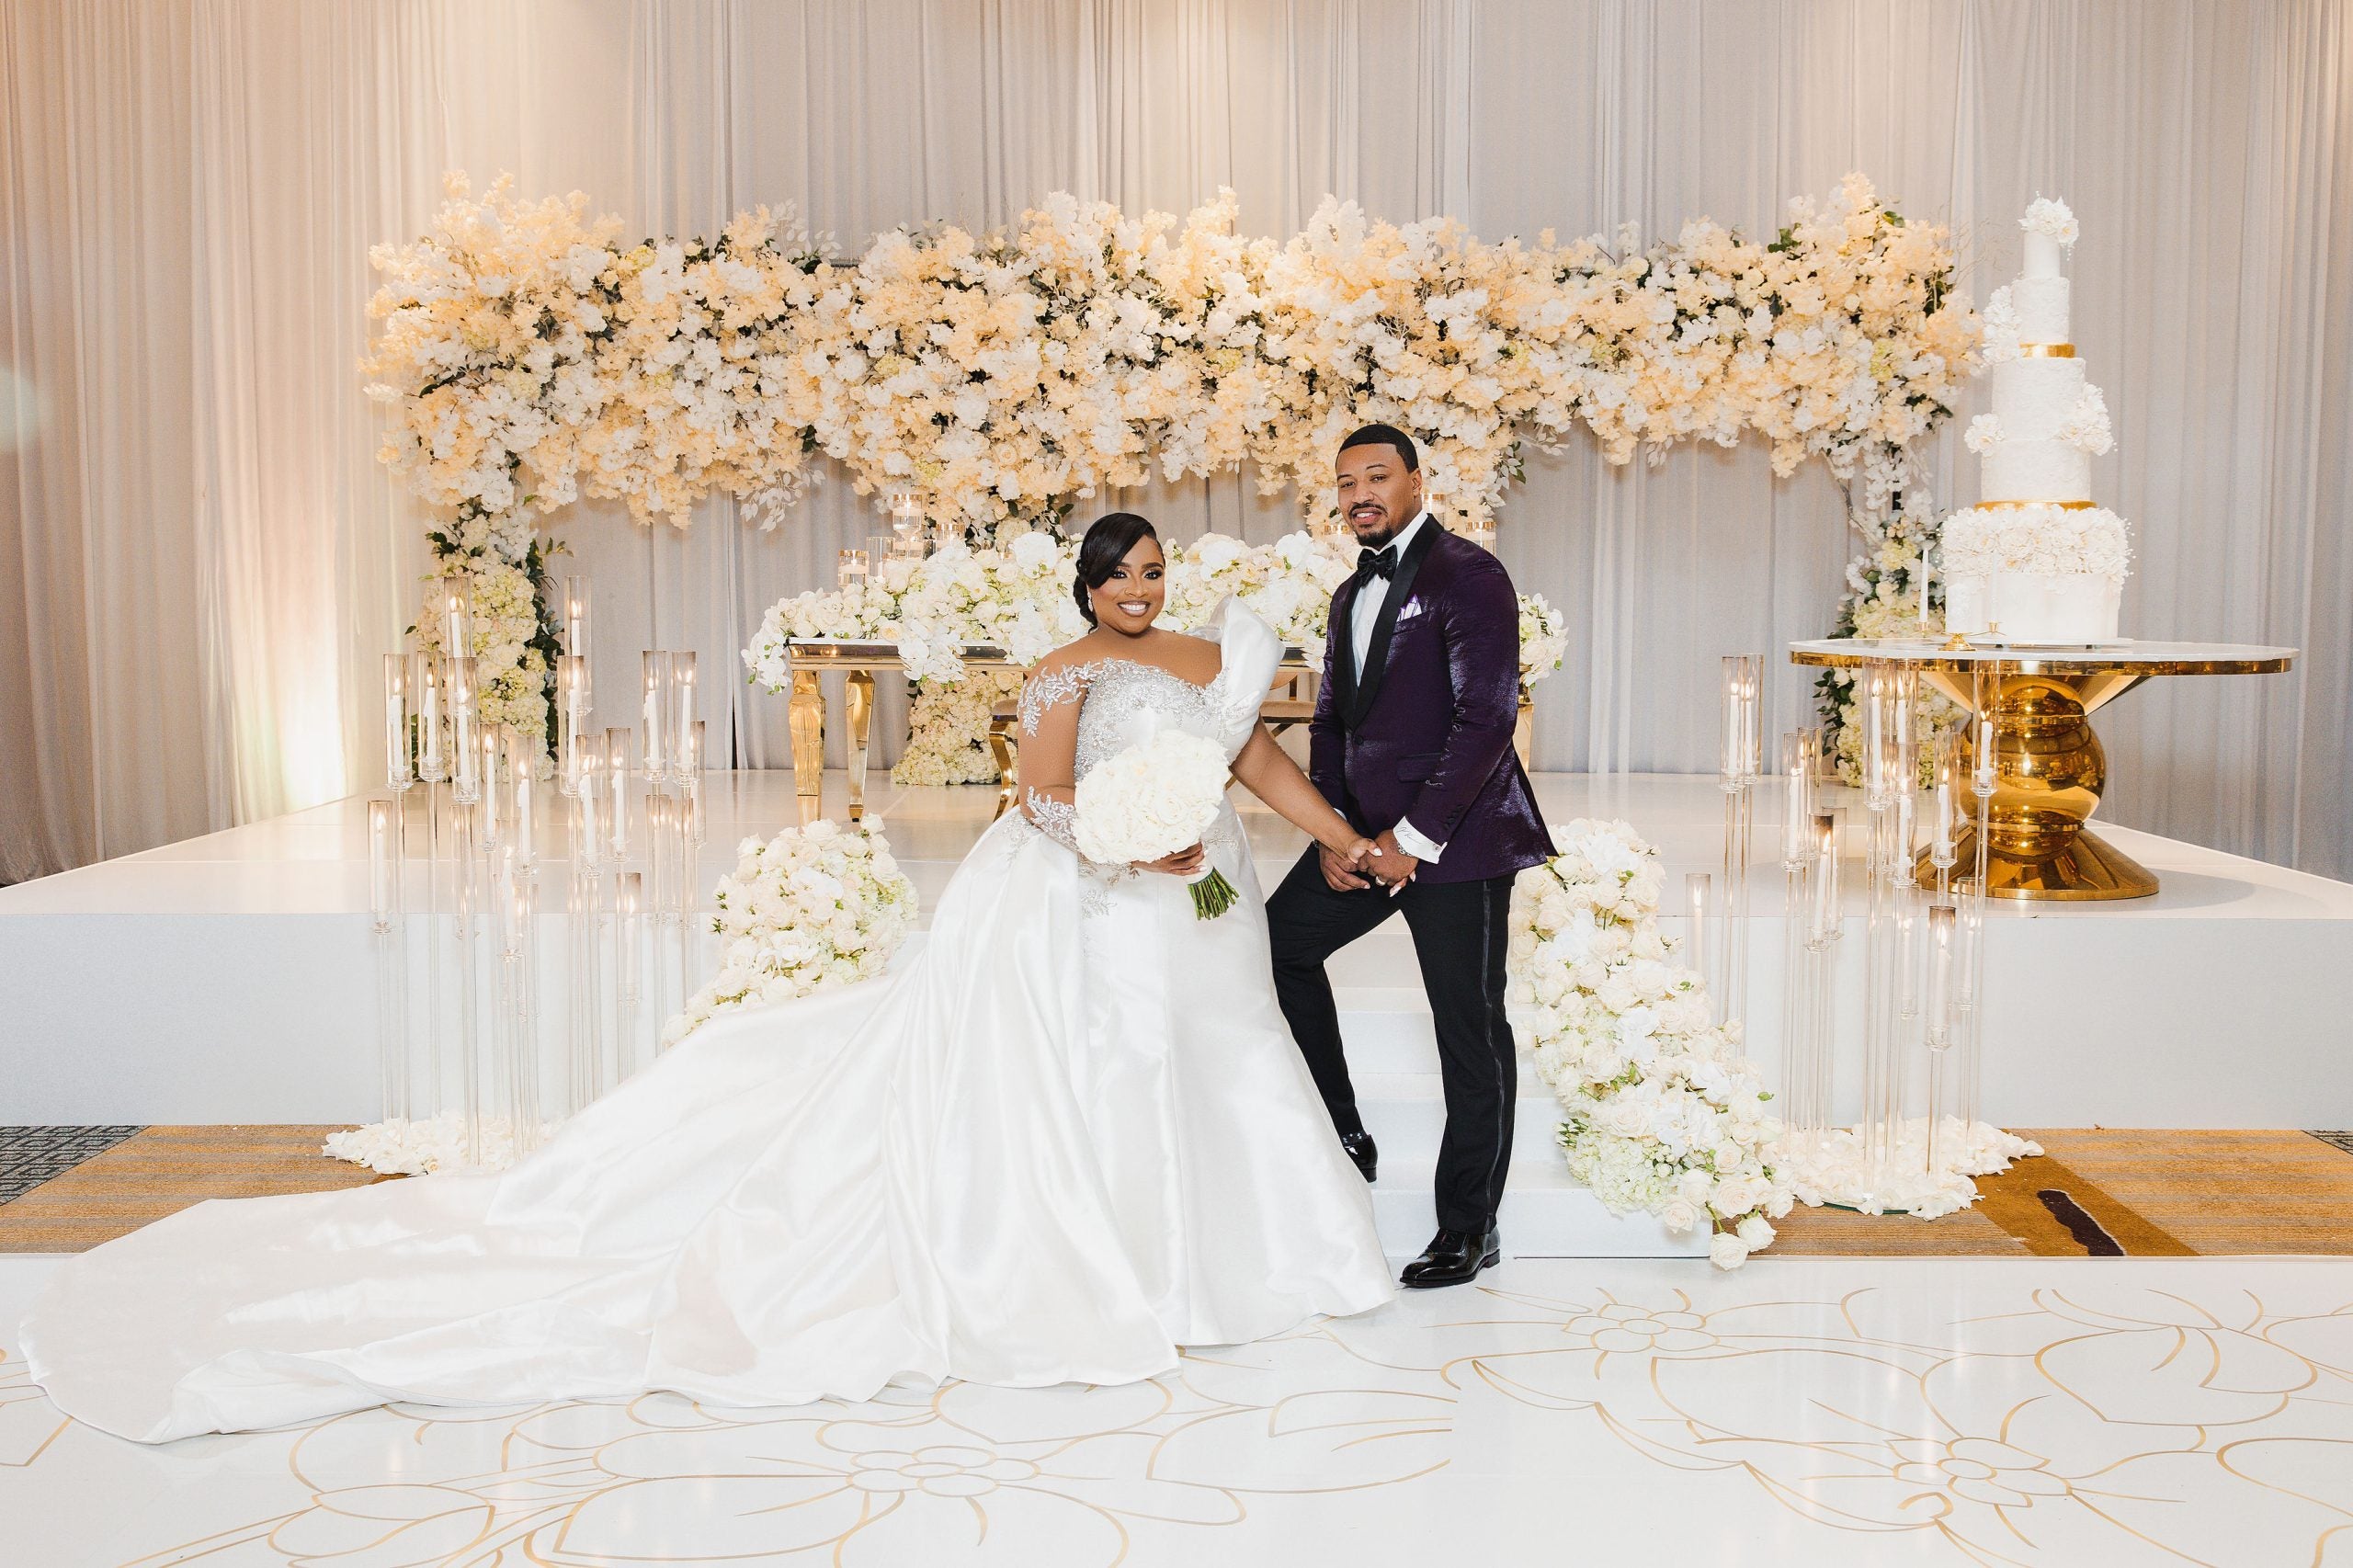 Exclusive: Kierra Sheard, Jordan Kelly Celebrated One-Year Anniversary With Gorgeous Wedding They Always Wanted